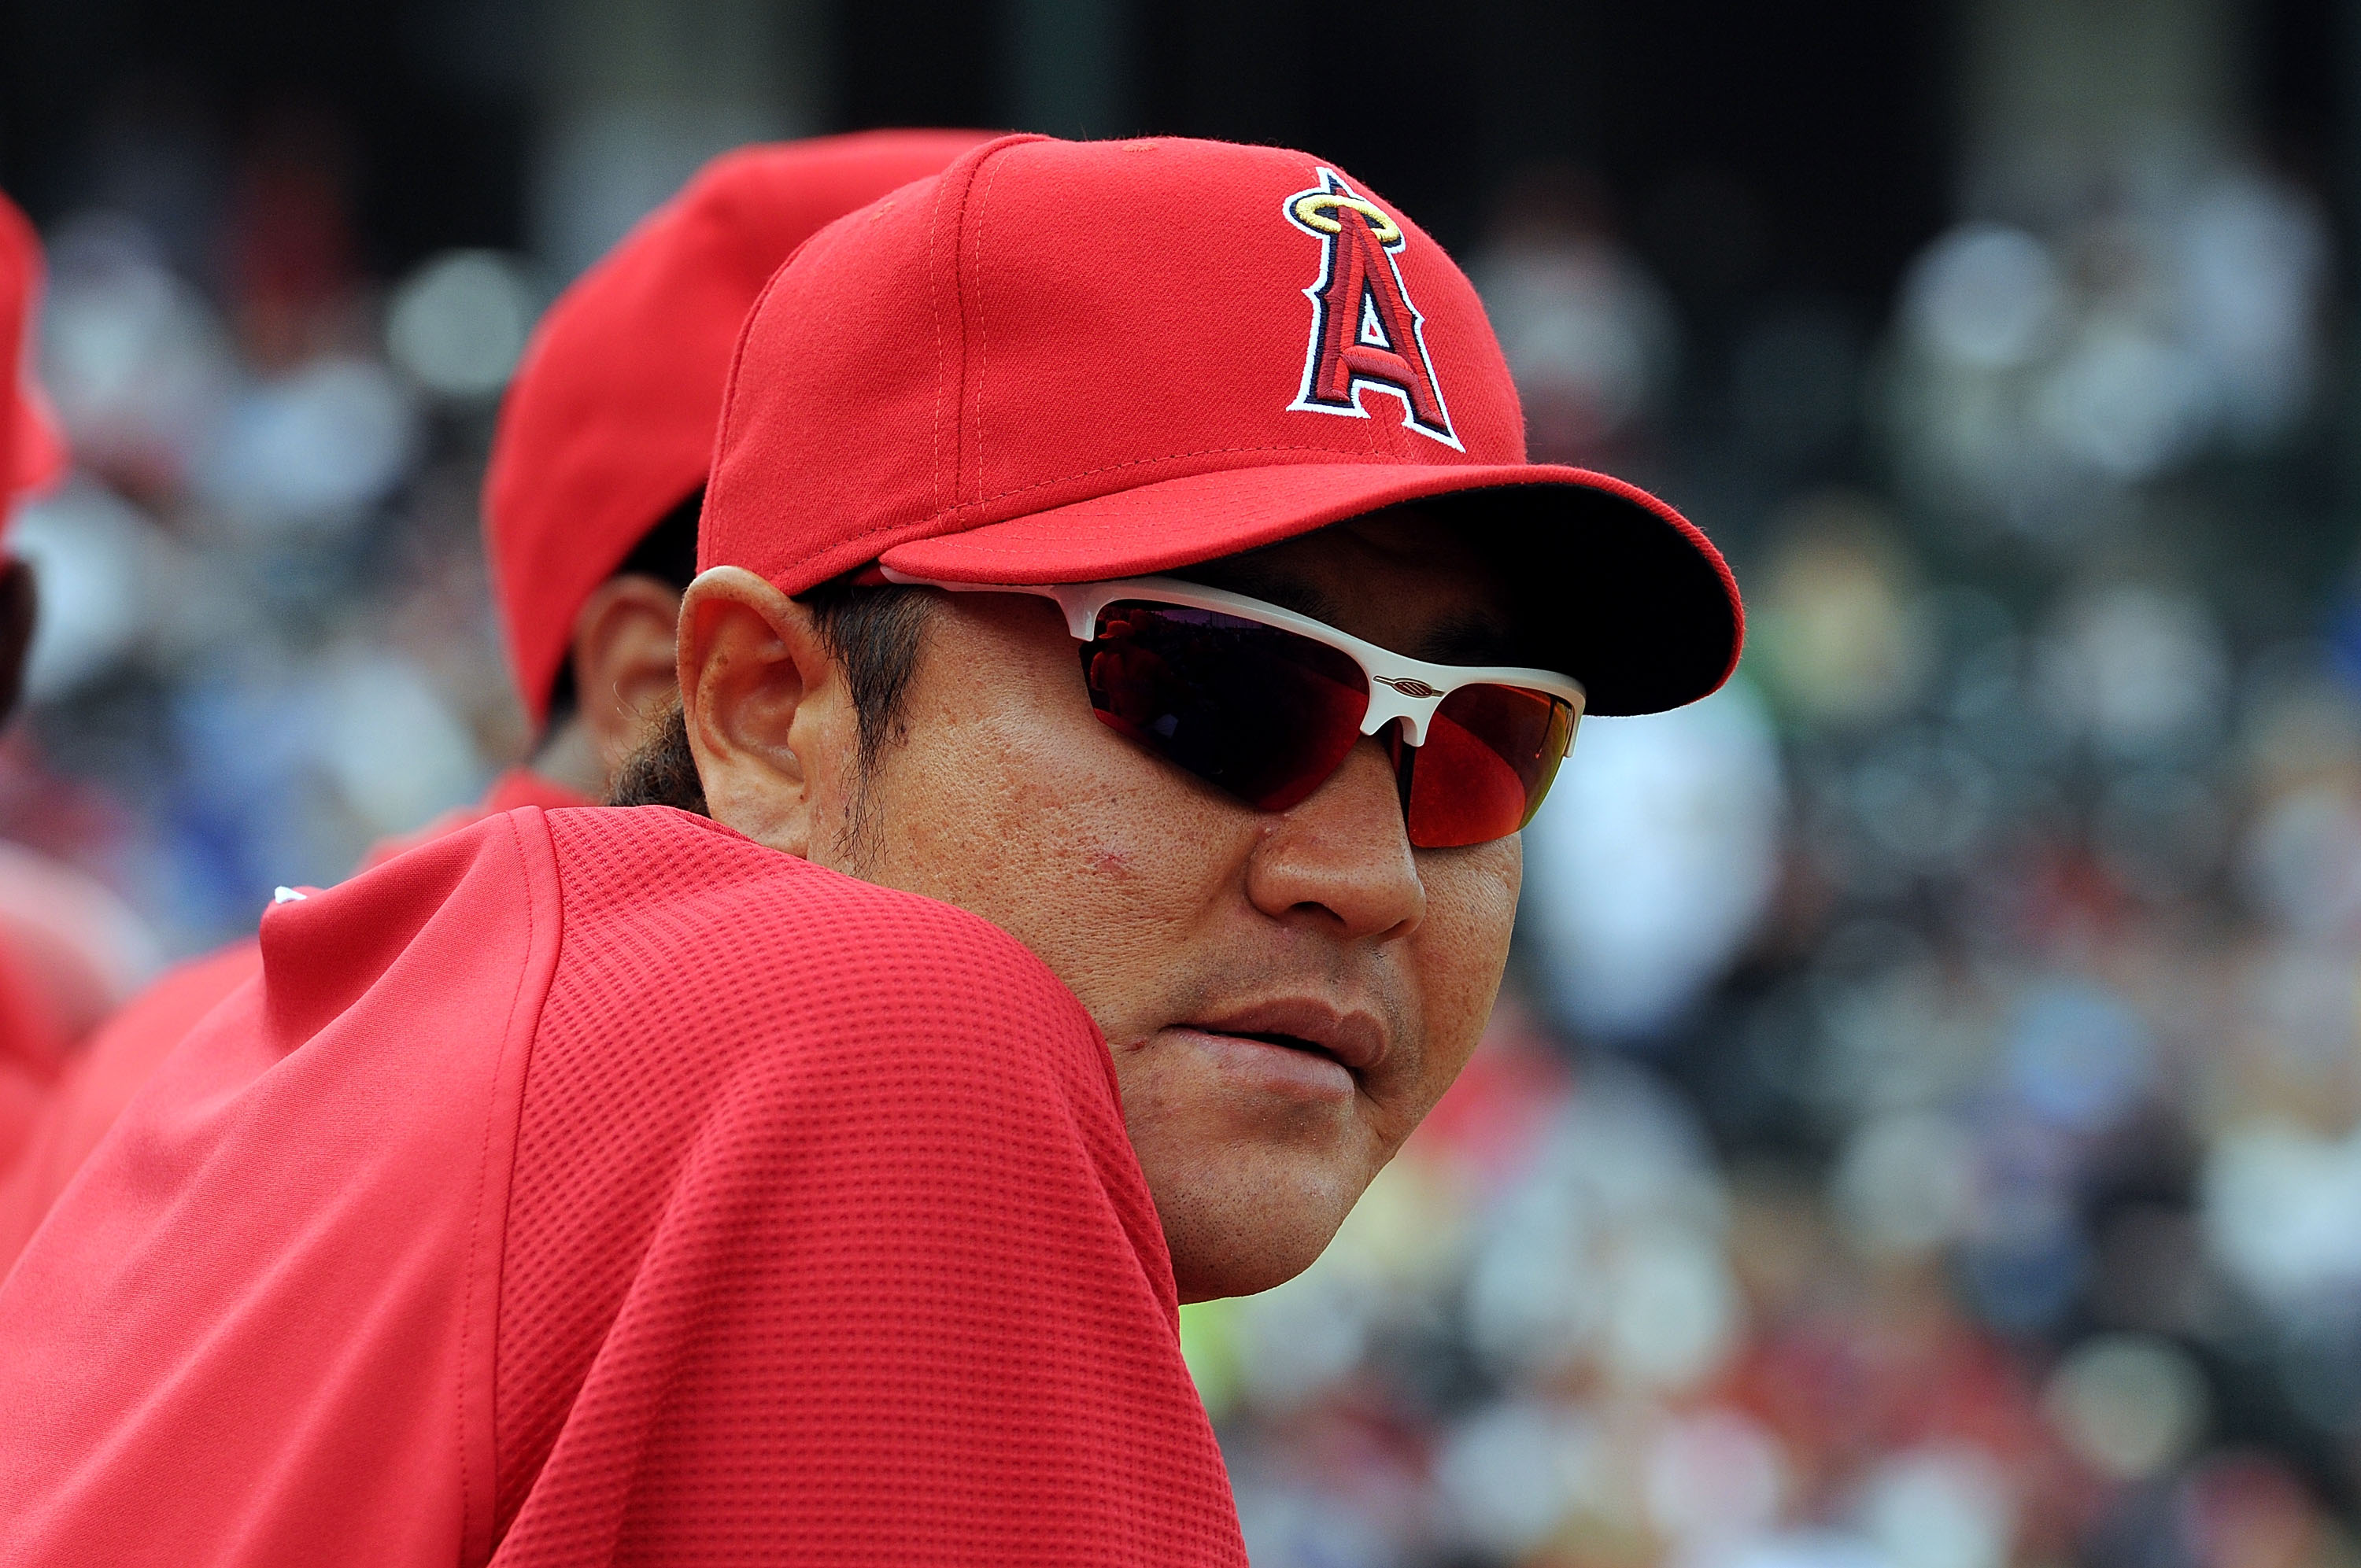 TEMPE, AZ - FEBRUARY 26:  Hisanori Takahashi #21 of the Los Angeles Angels of Anaheim watches from the bench during a game against the Los Angeles Dodgers at Tempe Diablo Stadium on February 26, 2011 in Tempe, Arizona.  (Photo by Norm Hall/Getty Images)